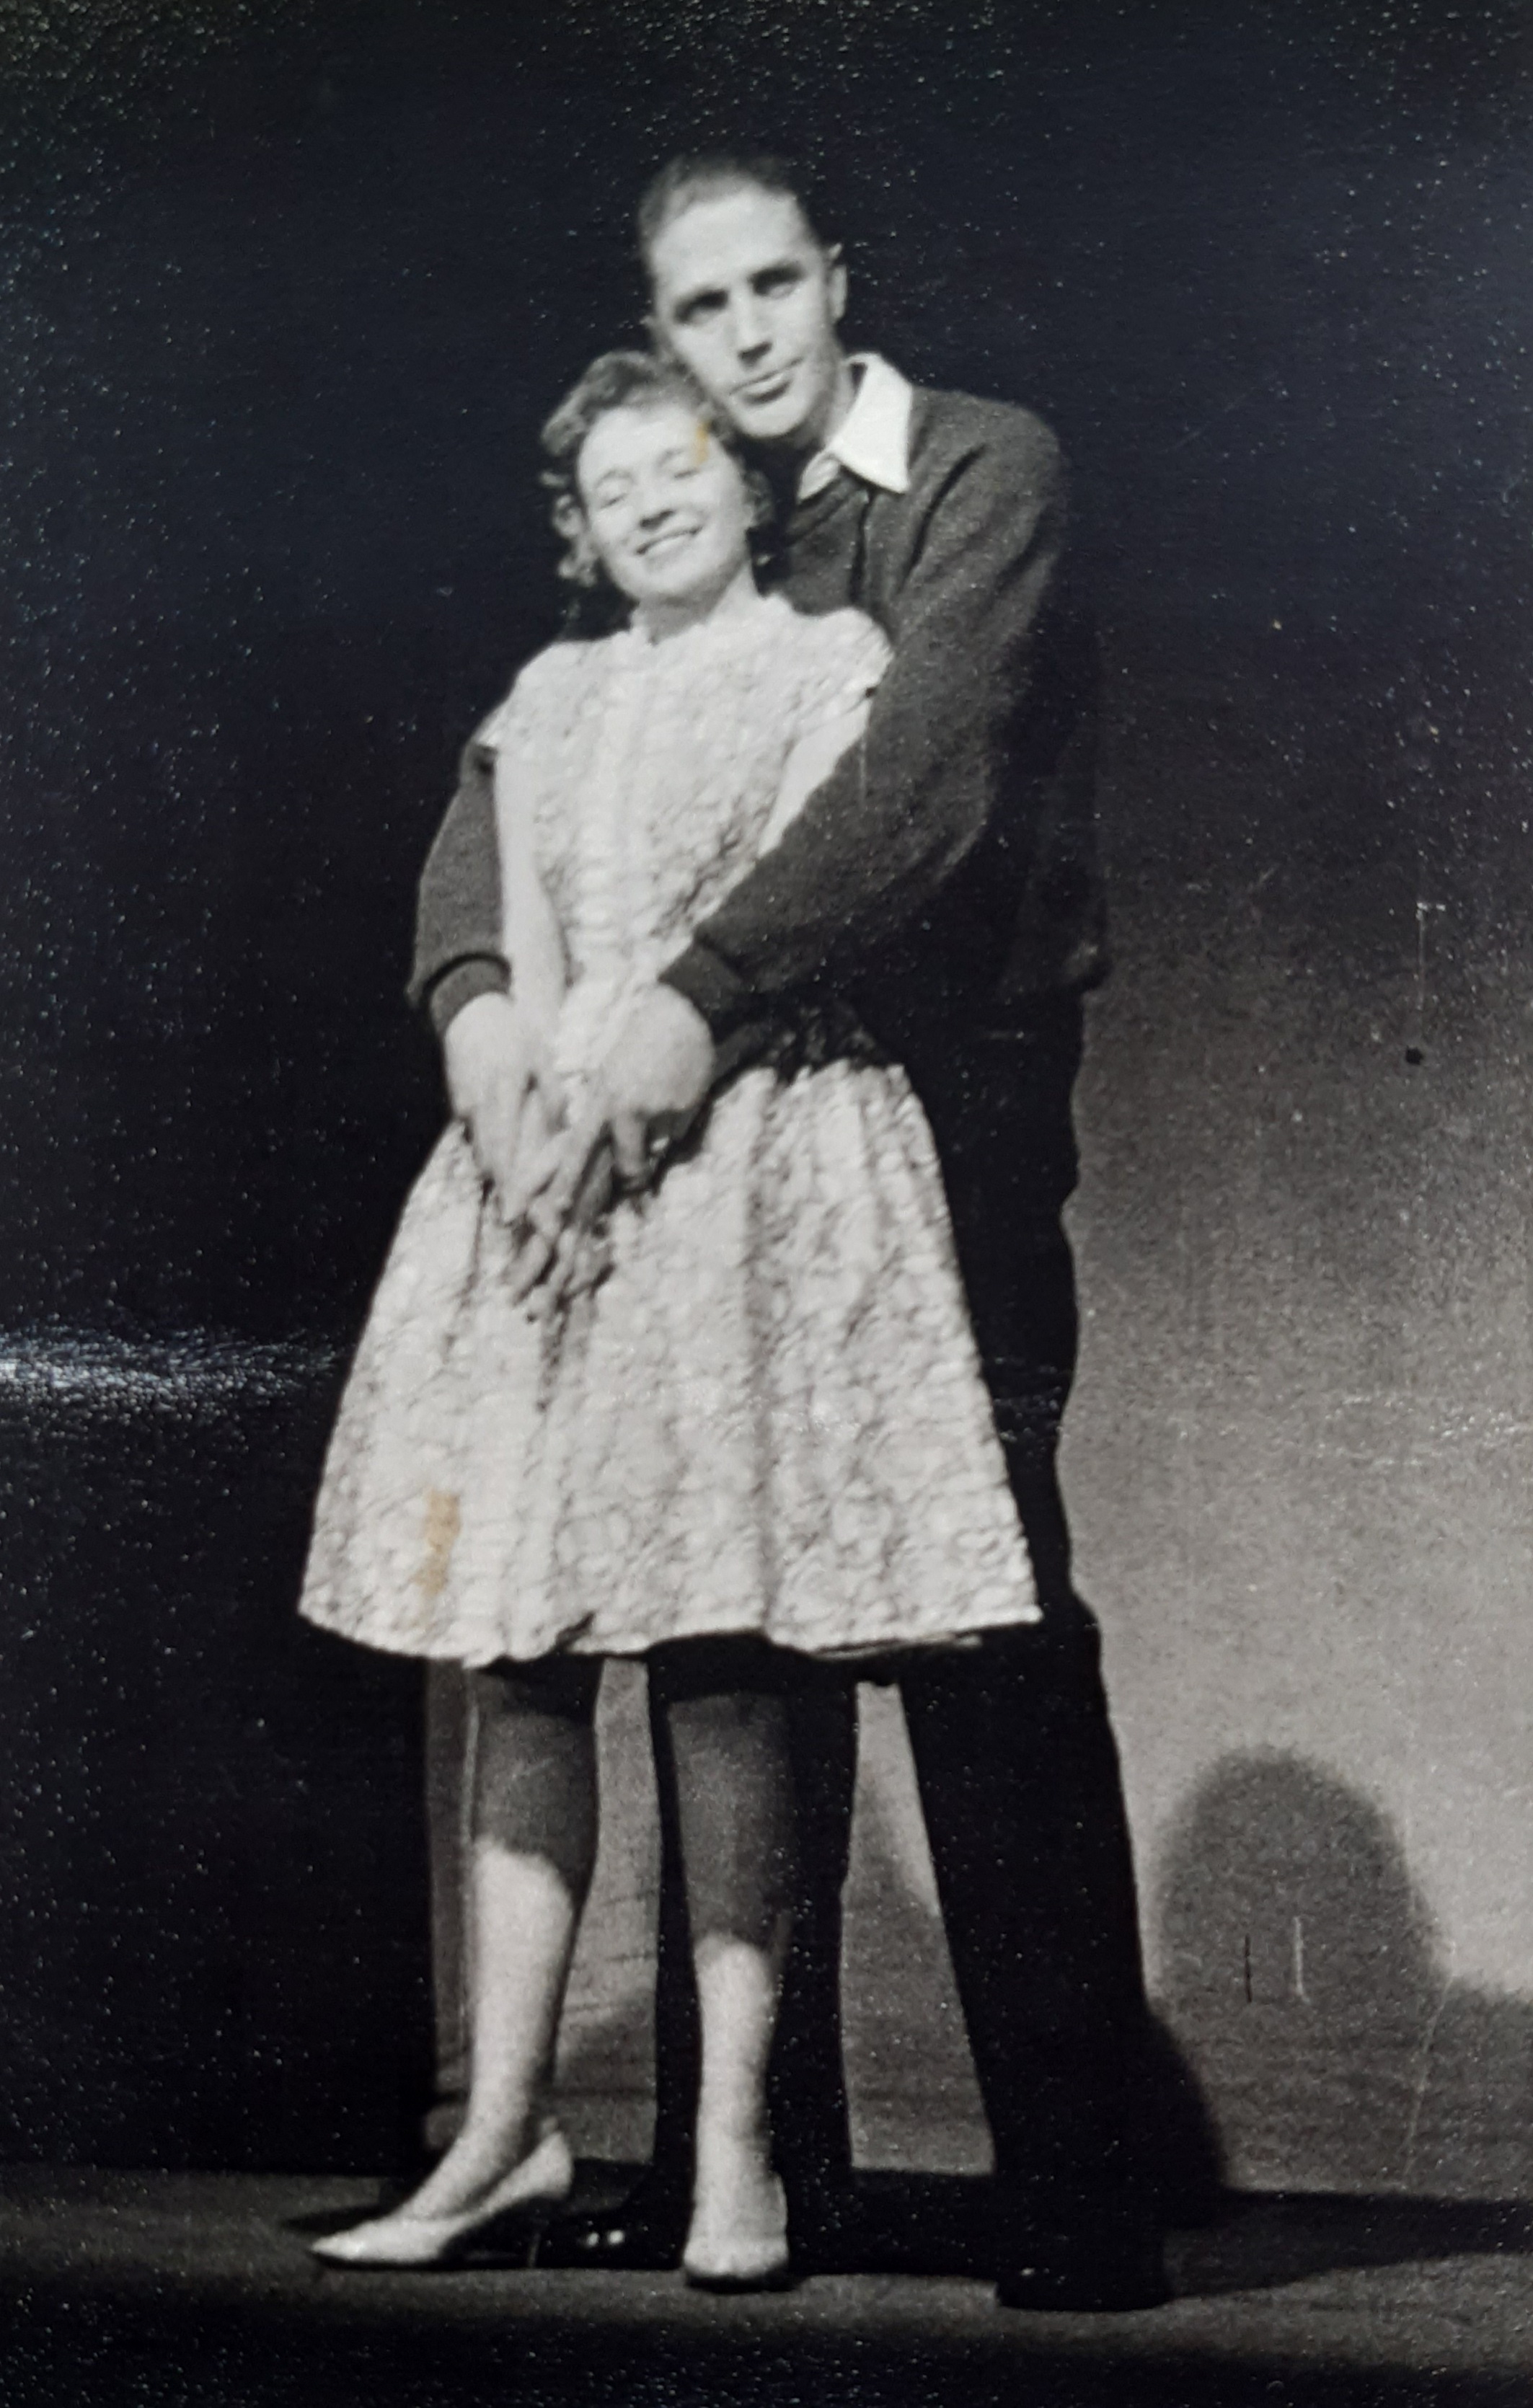 Doreen pictured with Robert Wilson in the 1956 St John’s Players production of Someone Waiting